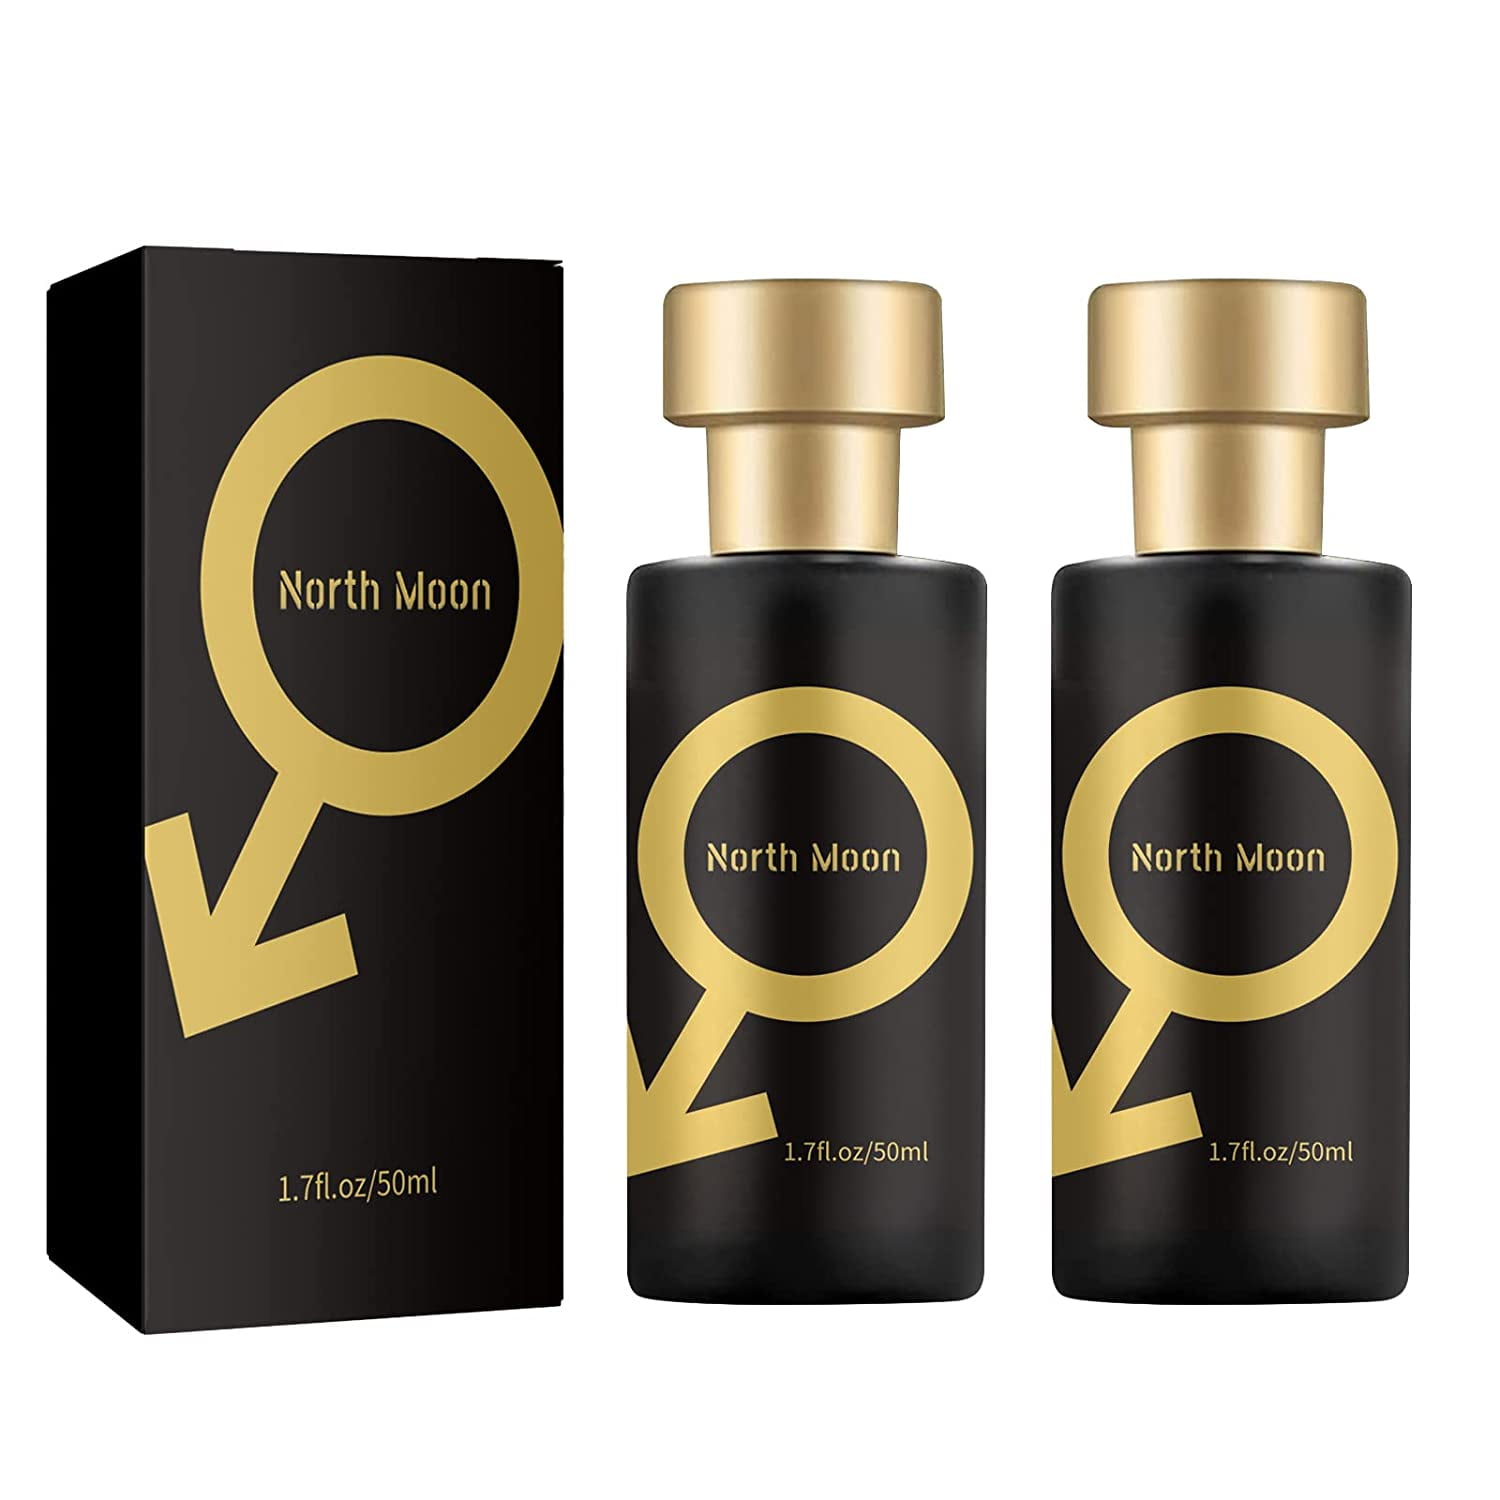 North Moon Cologne, North Moon Cologne Pheromone 1.7 floz, Cologne for ...